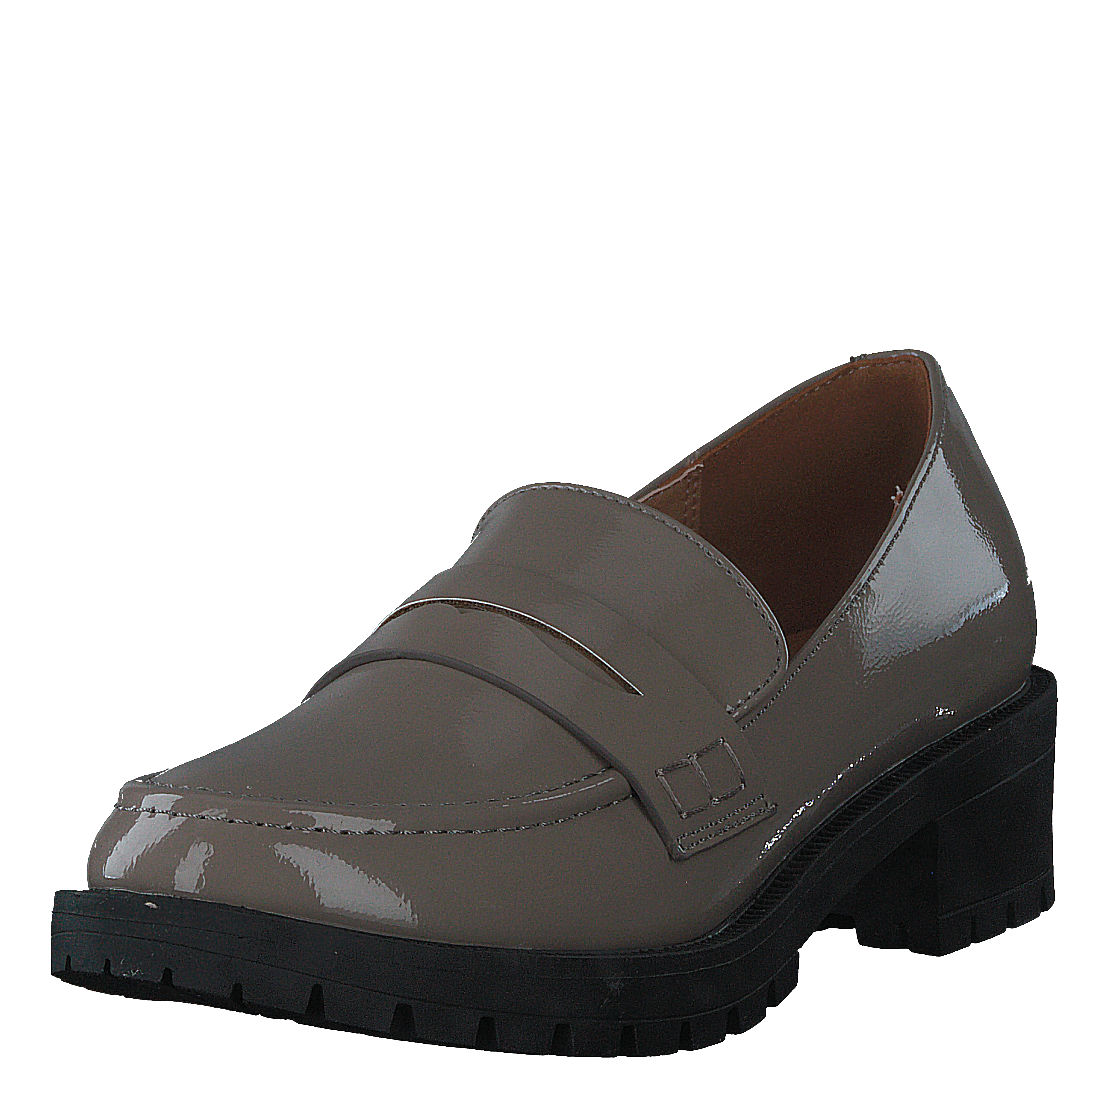 Biapearl Simple Penny Loafer P Taupe